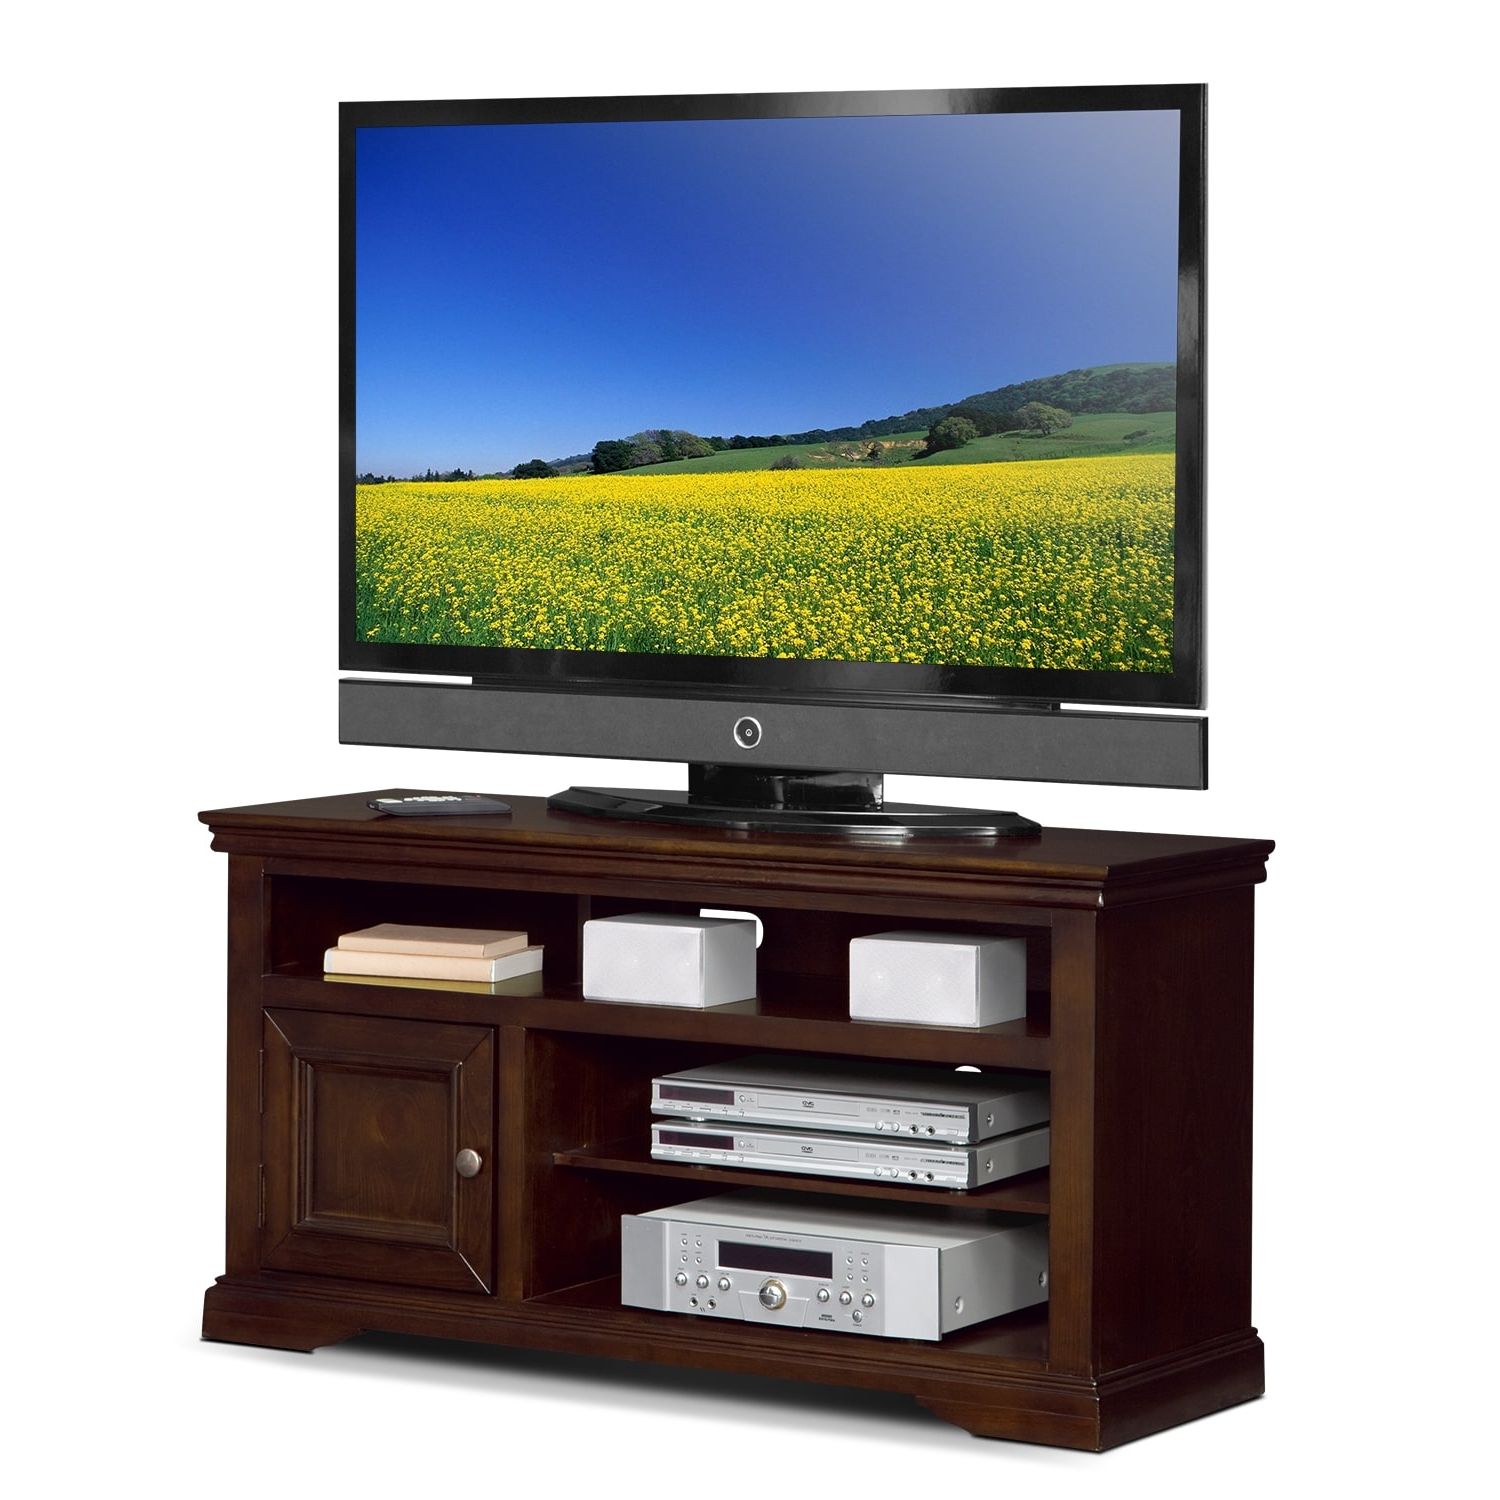 Jenson 50" Tv Stand – Cherry | American Signature Furniture Regarding Tracy Tv Stands For Tvs Up To 50" (View 15 of 20)